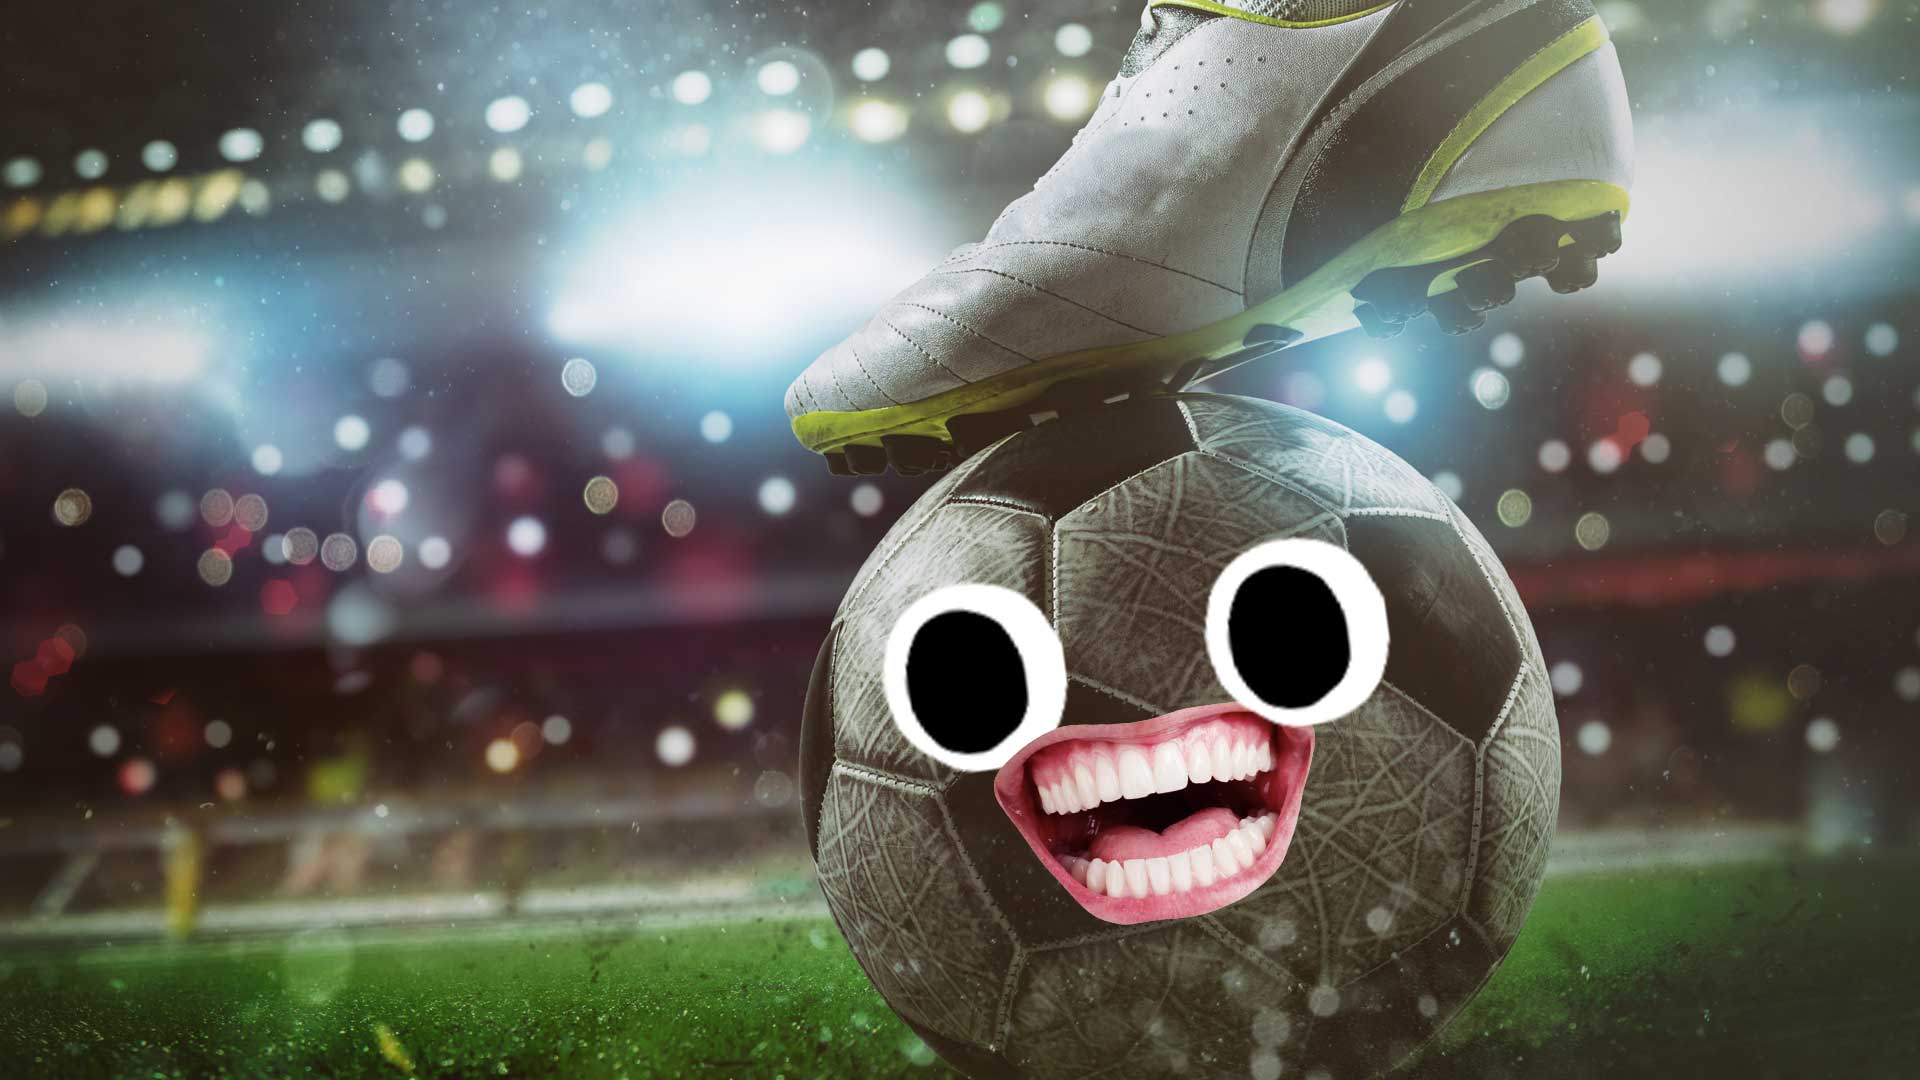 A smiling football before a penalty kick